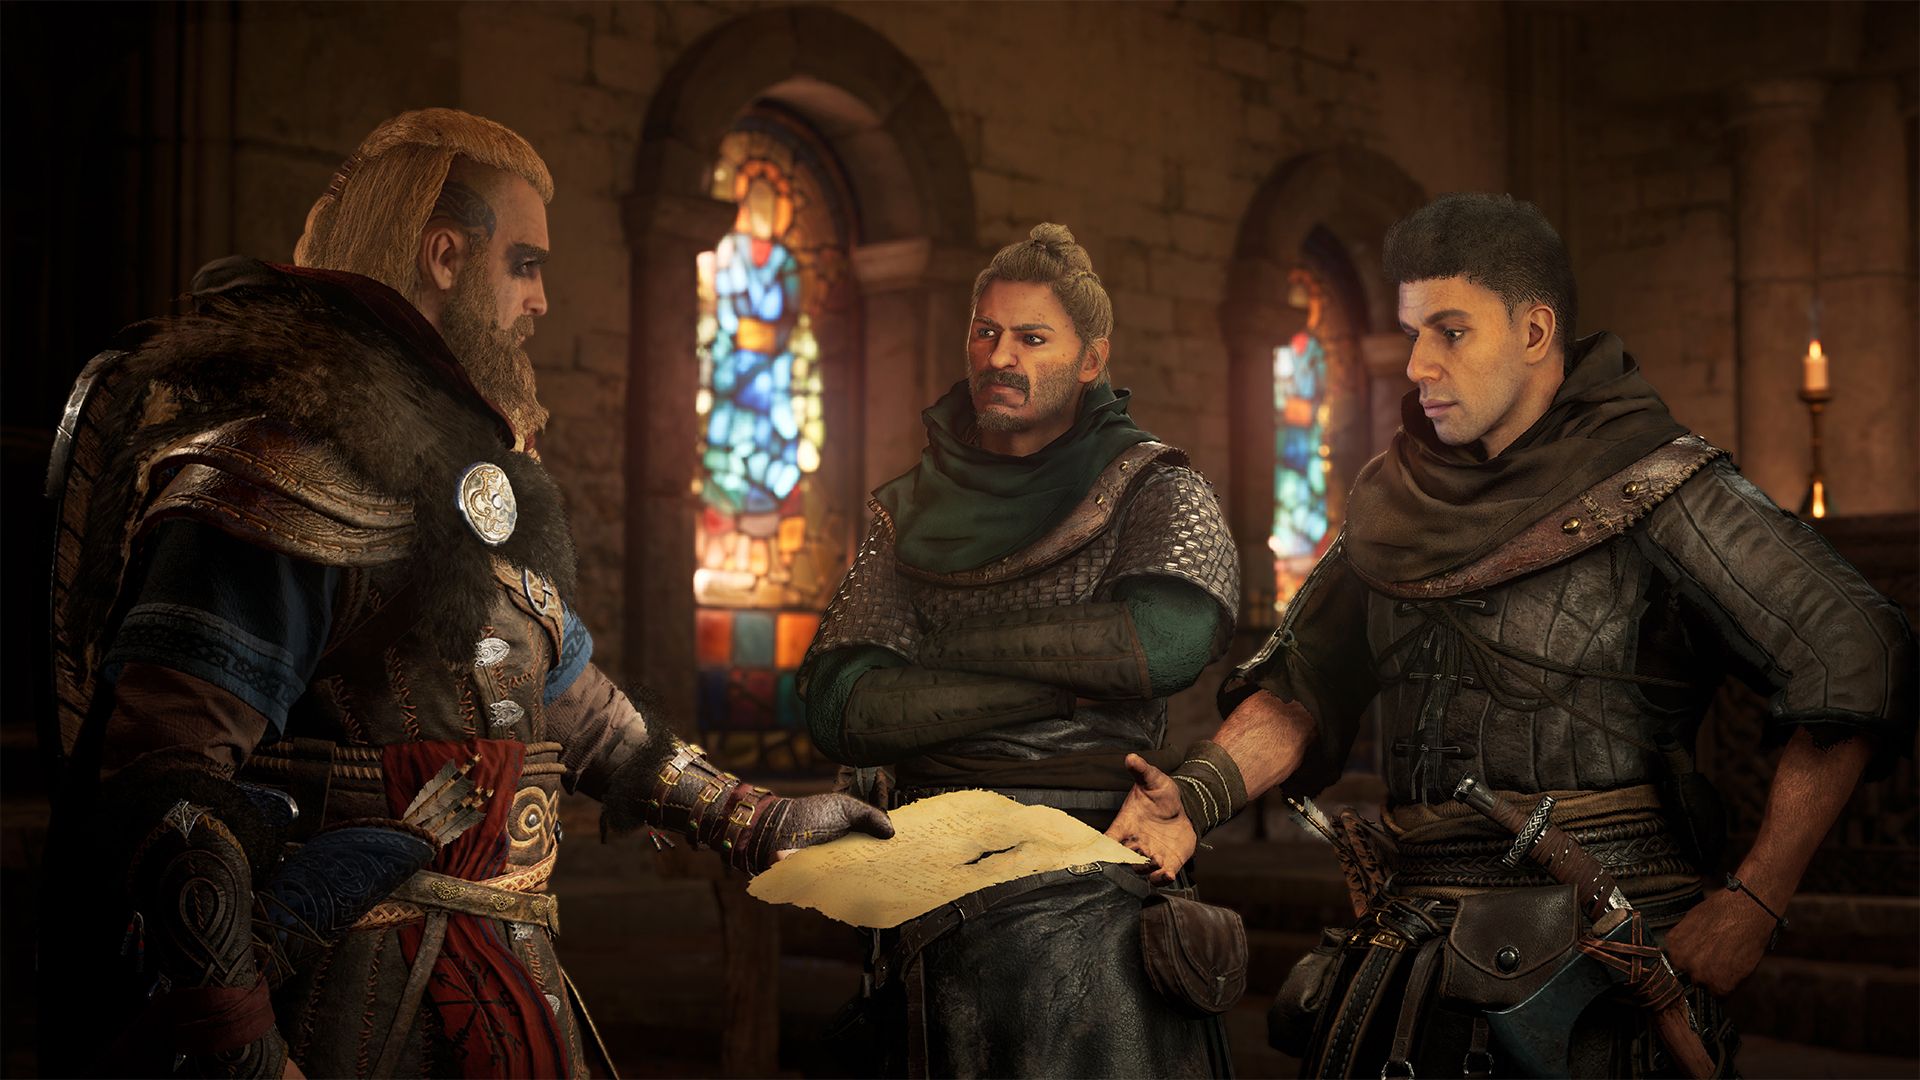 Assassin's Creed Valhalla Will Let You Choose to Play as Male or